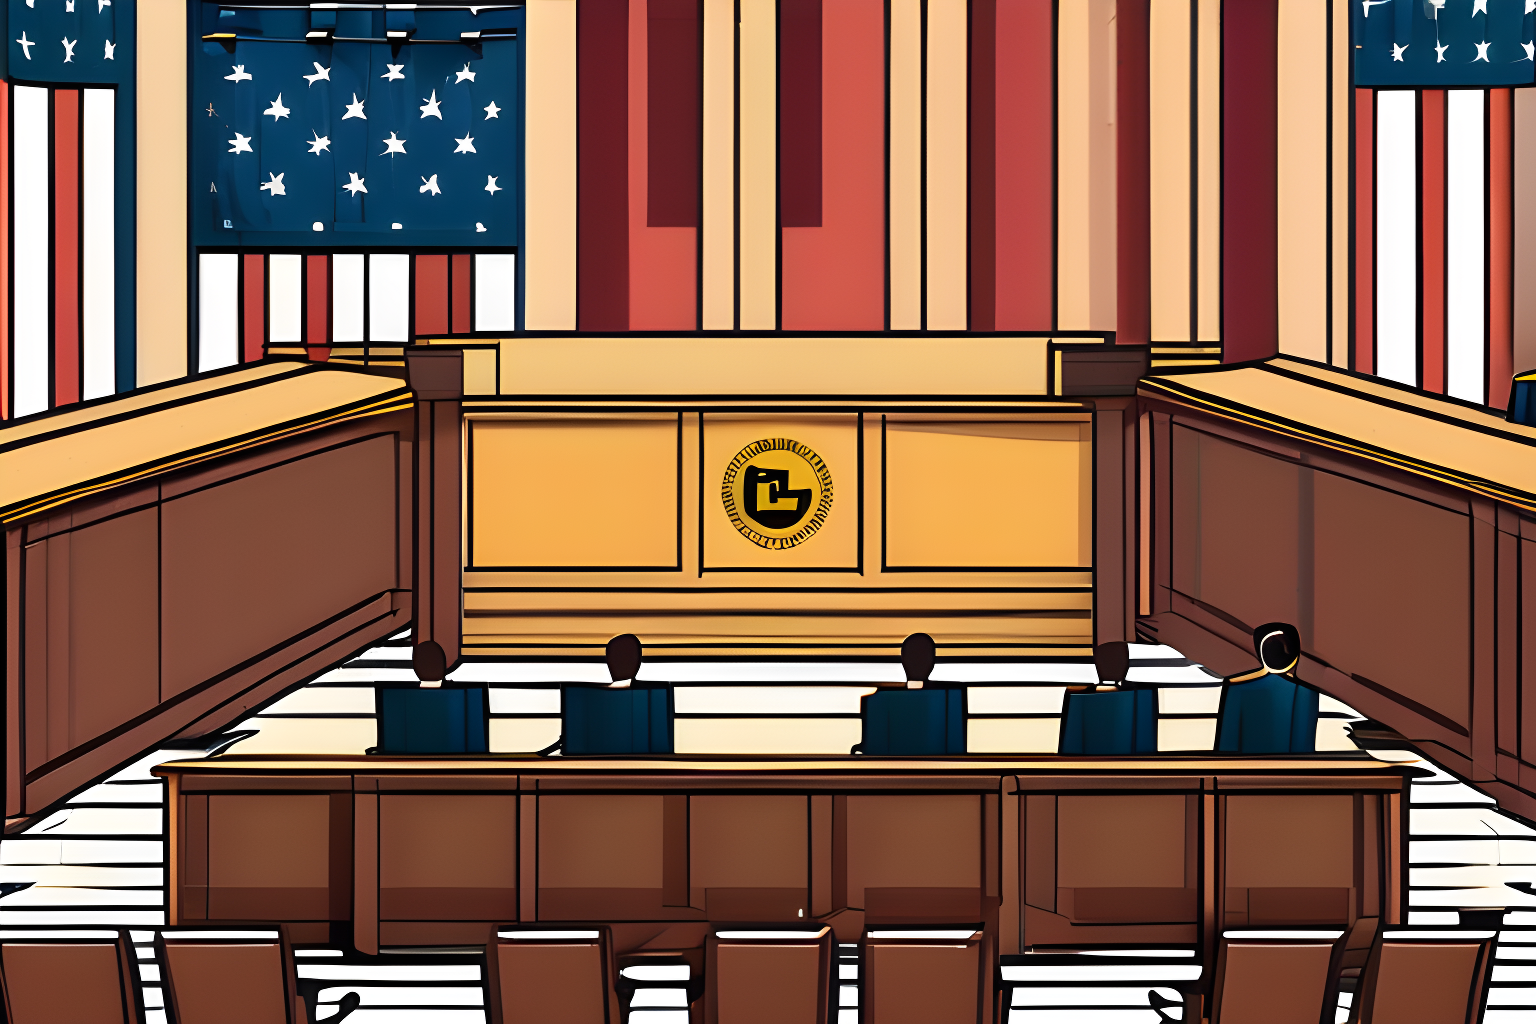 Illustrate a courtroom with the plaintiffs, the SEC, and the defendants, Binance facing off